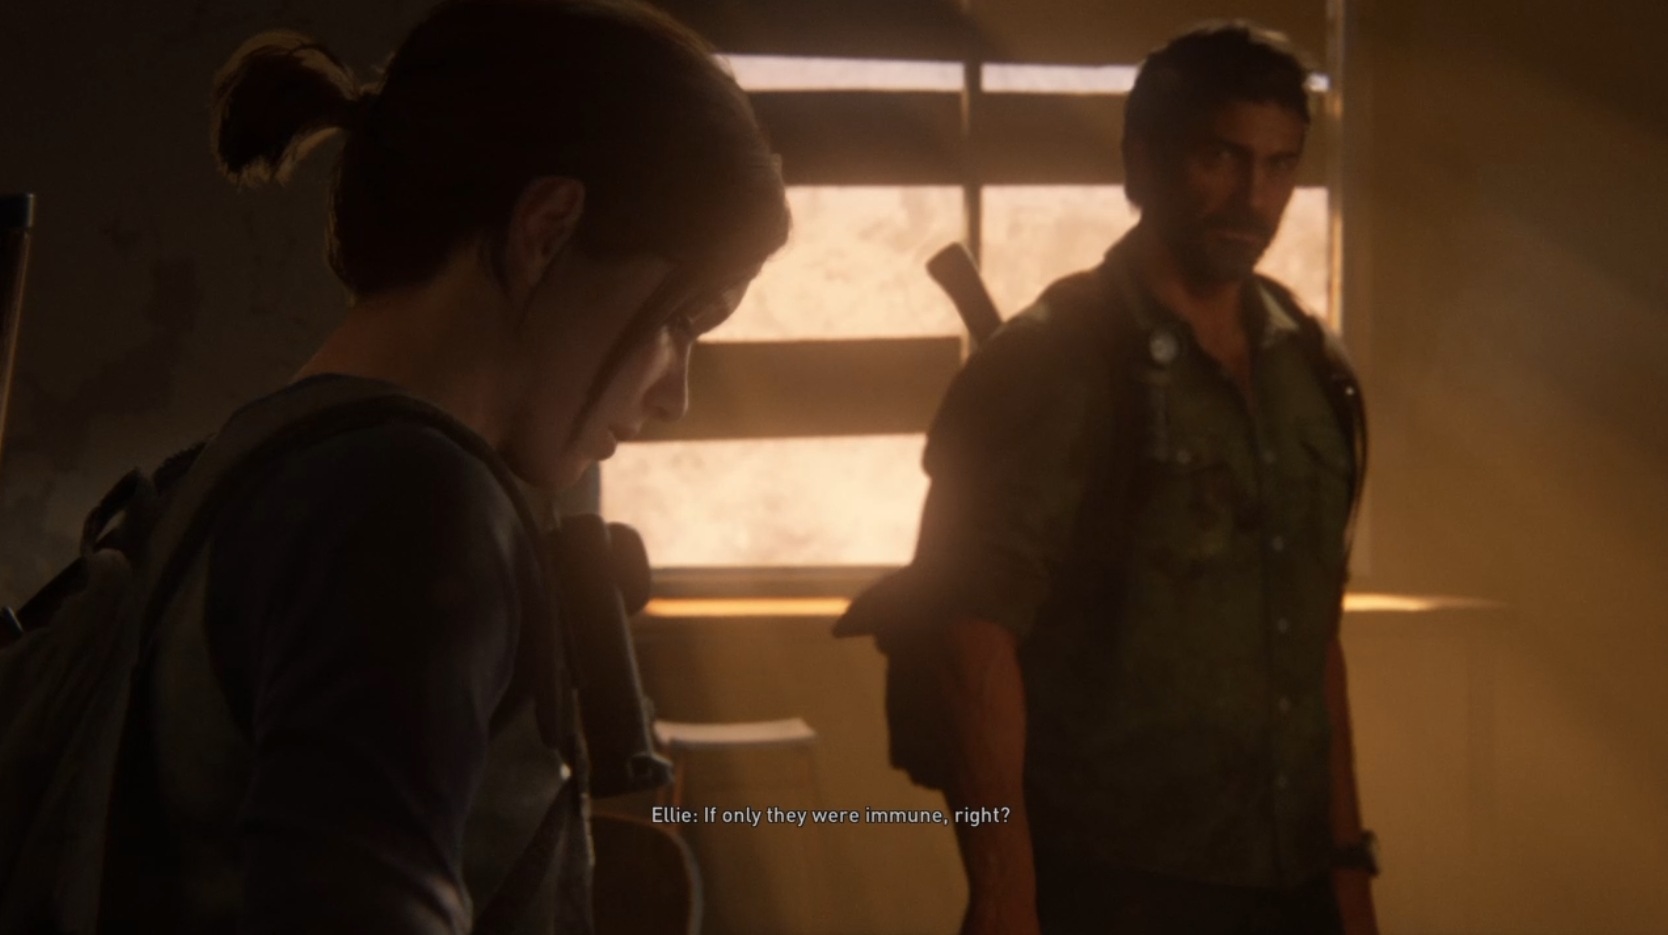 The Last of Us': Does Ellie know Joel is lying at the end?